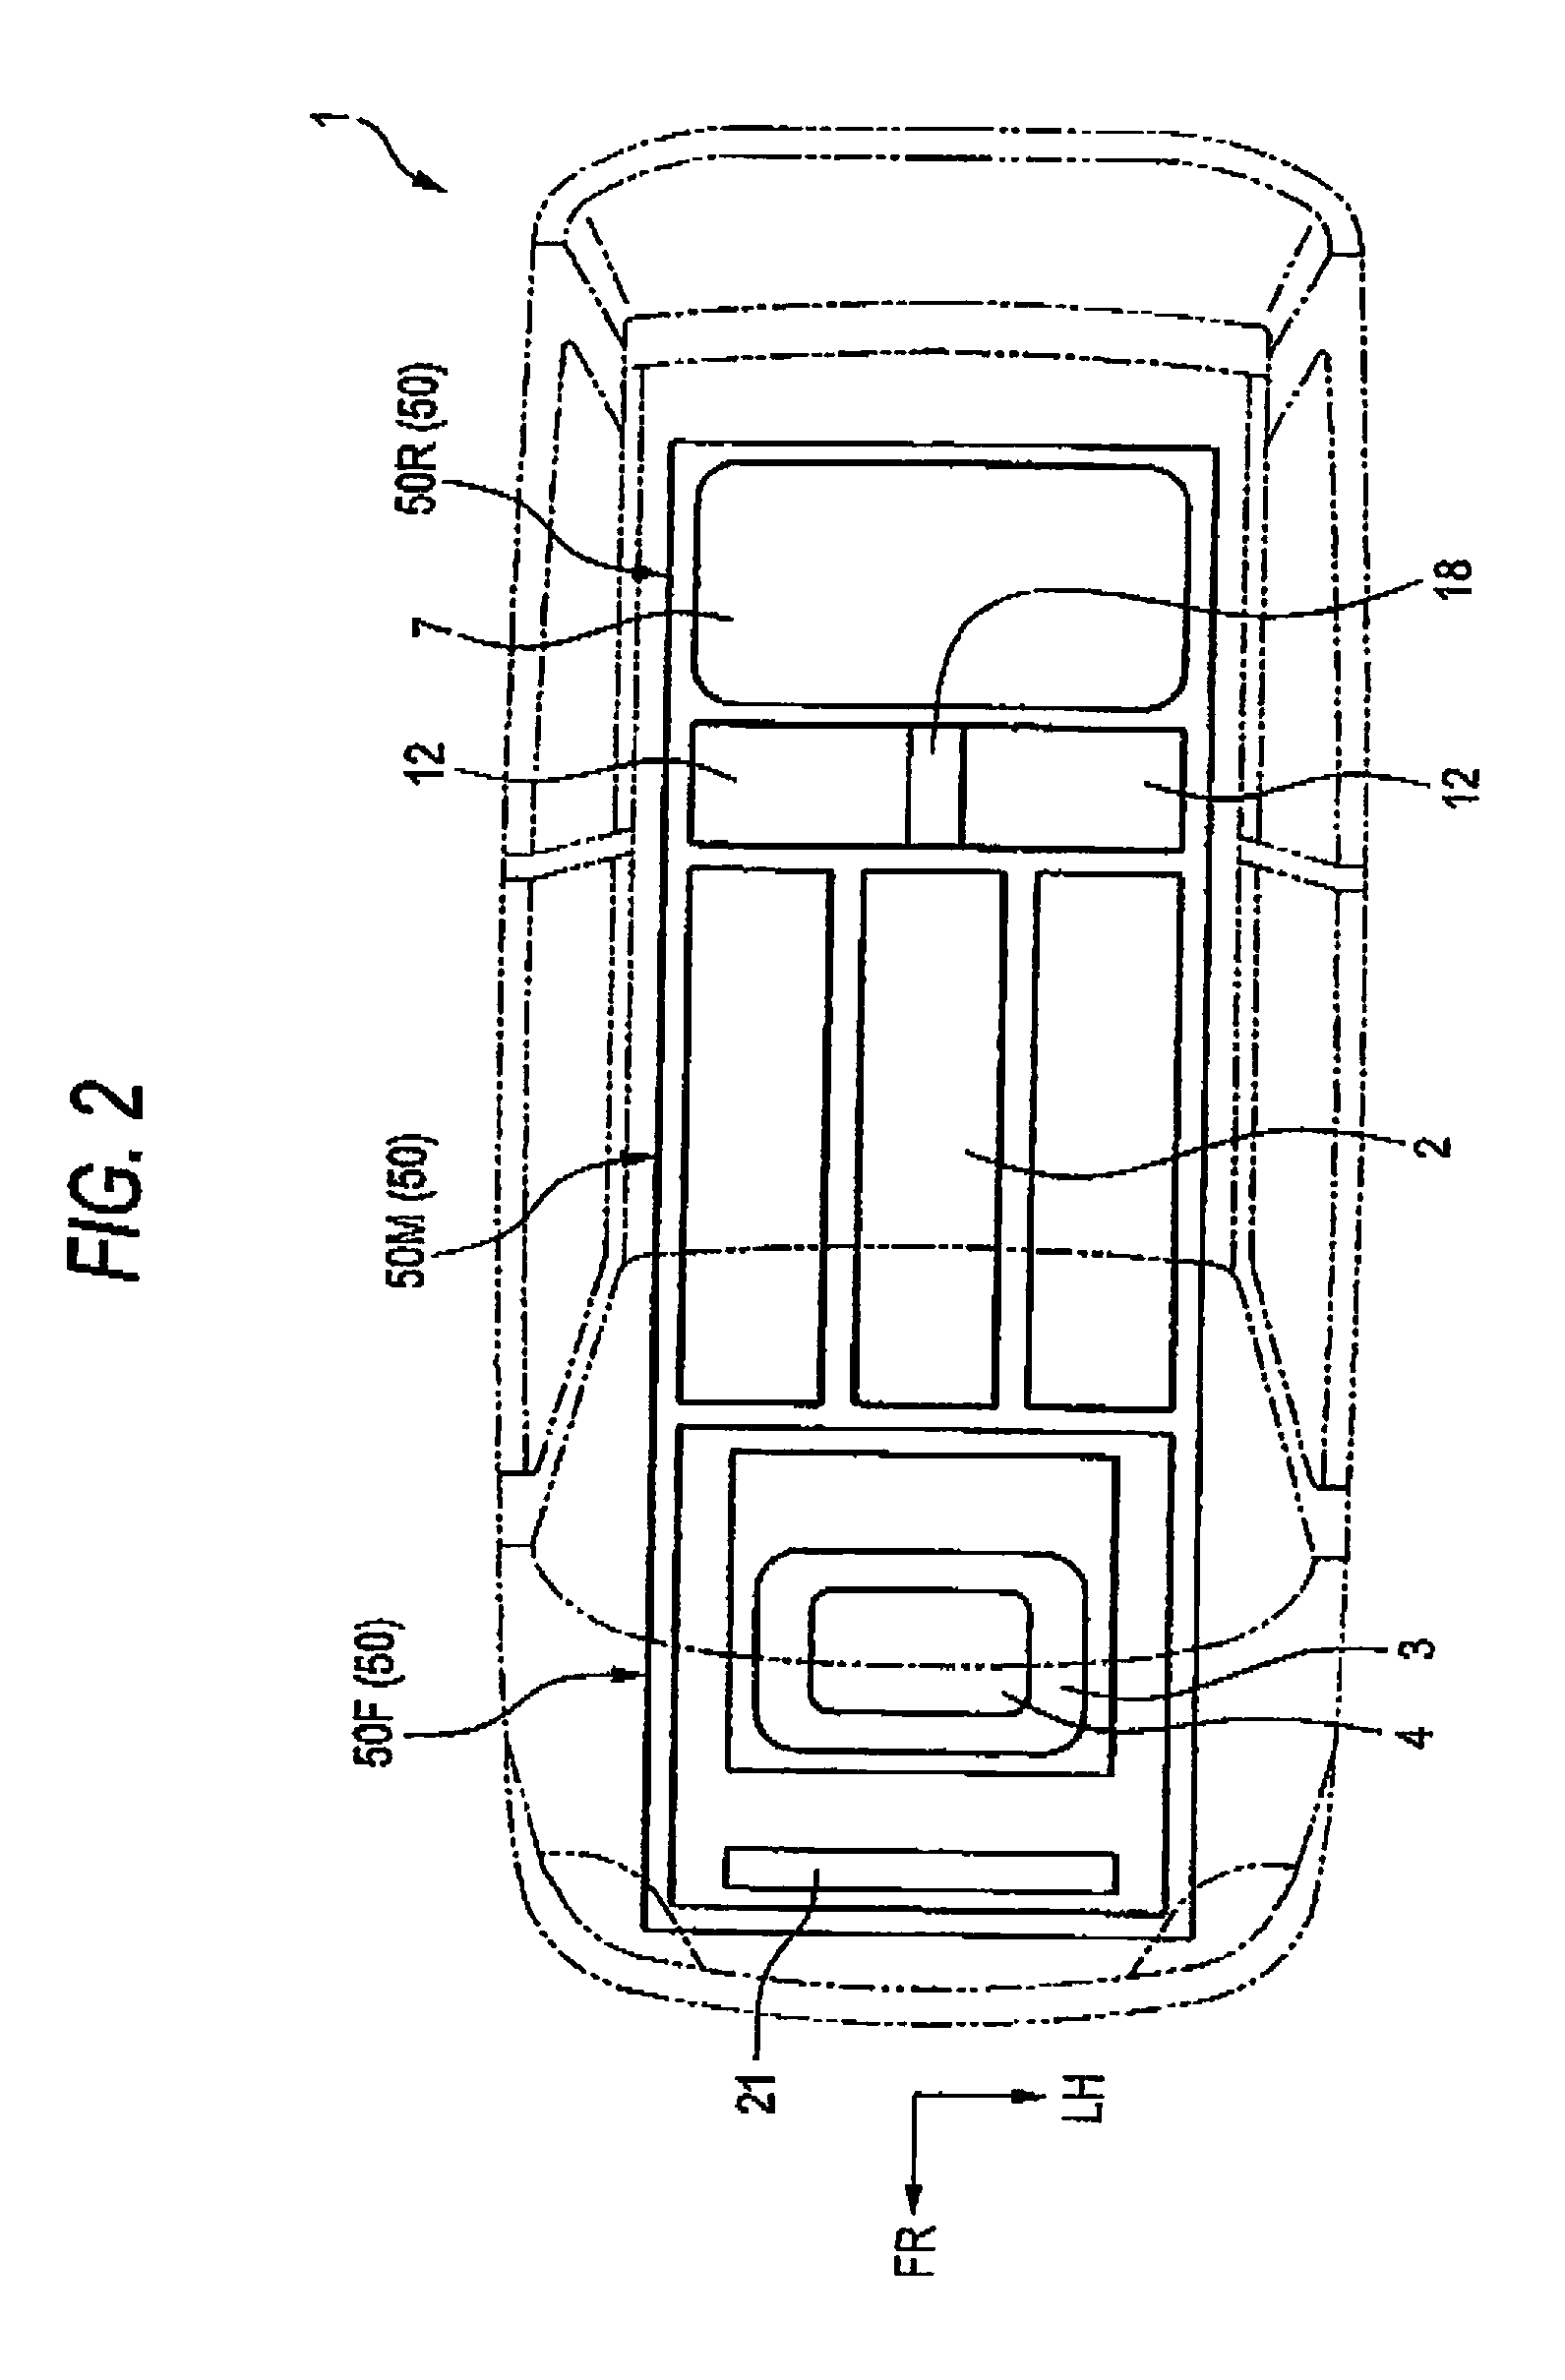 Vehicle mounted with electric storage apparatus